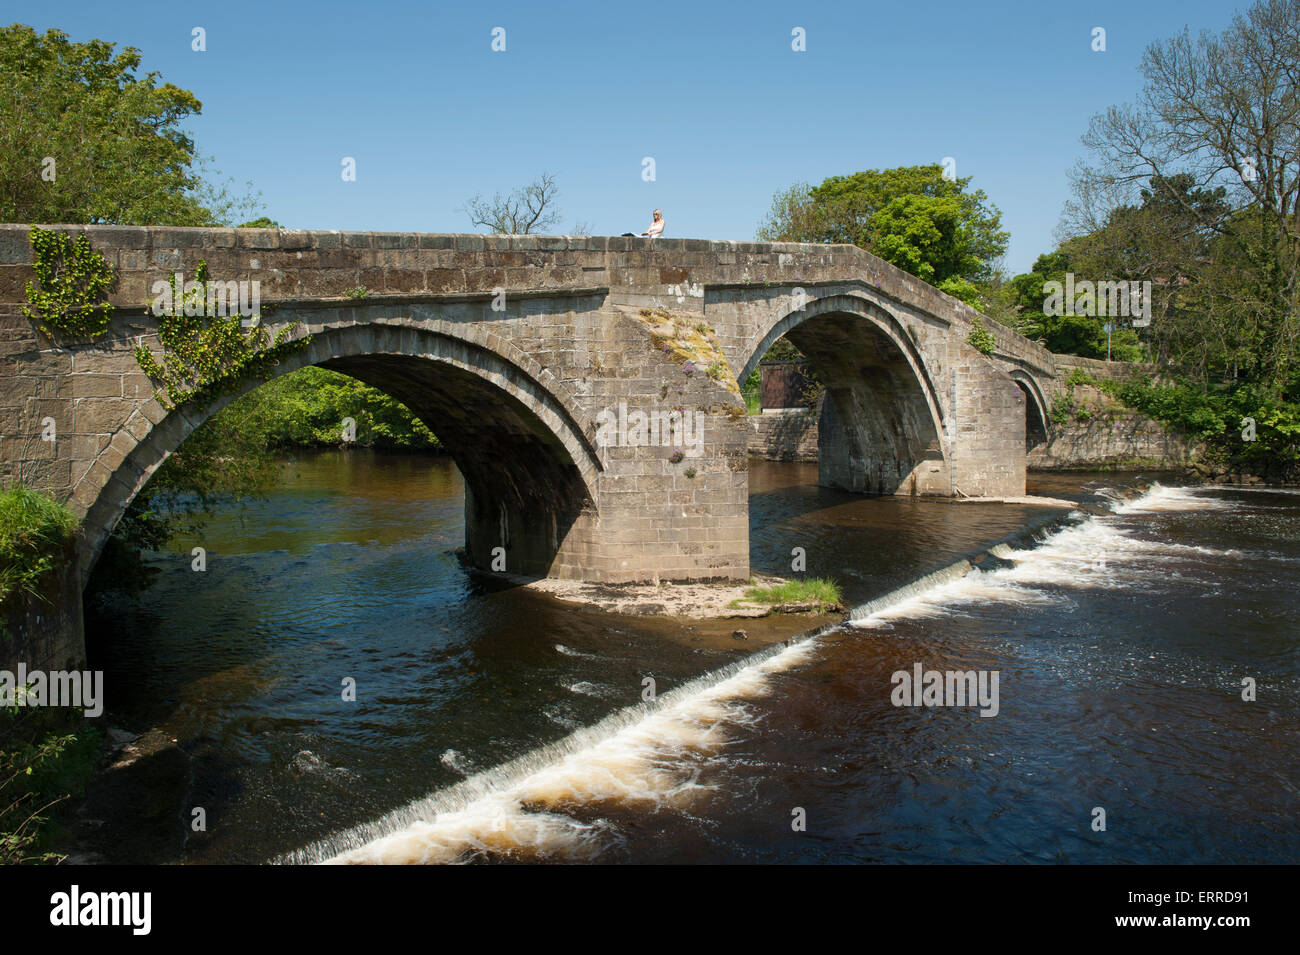 Woman crossing scenic River Wharfe on old stone packhorse bridge over flowing water & small weir - Old Bridge, Ilkley, West Yorkshire, England, UK. Stock Photo